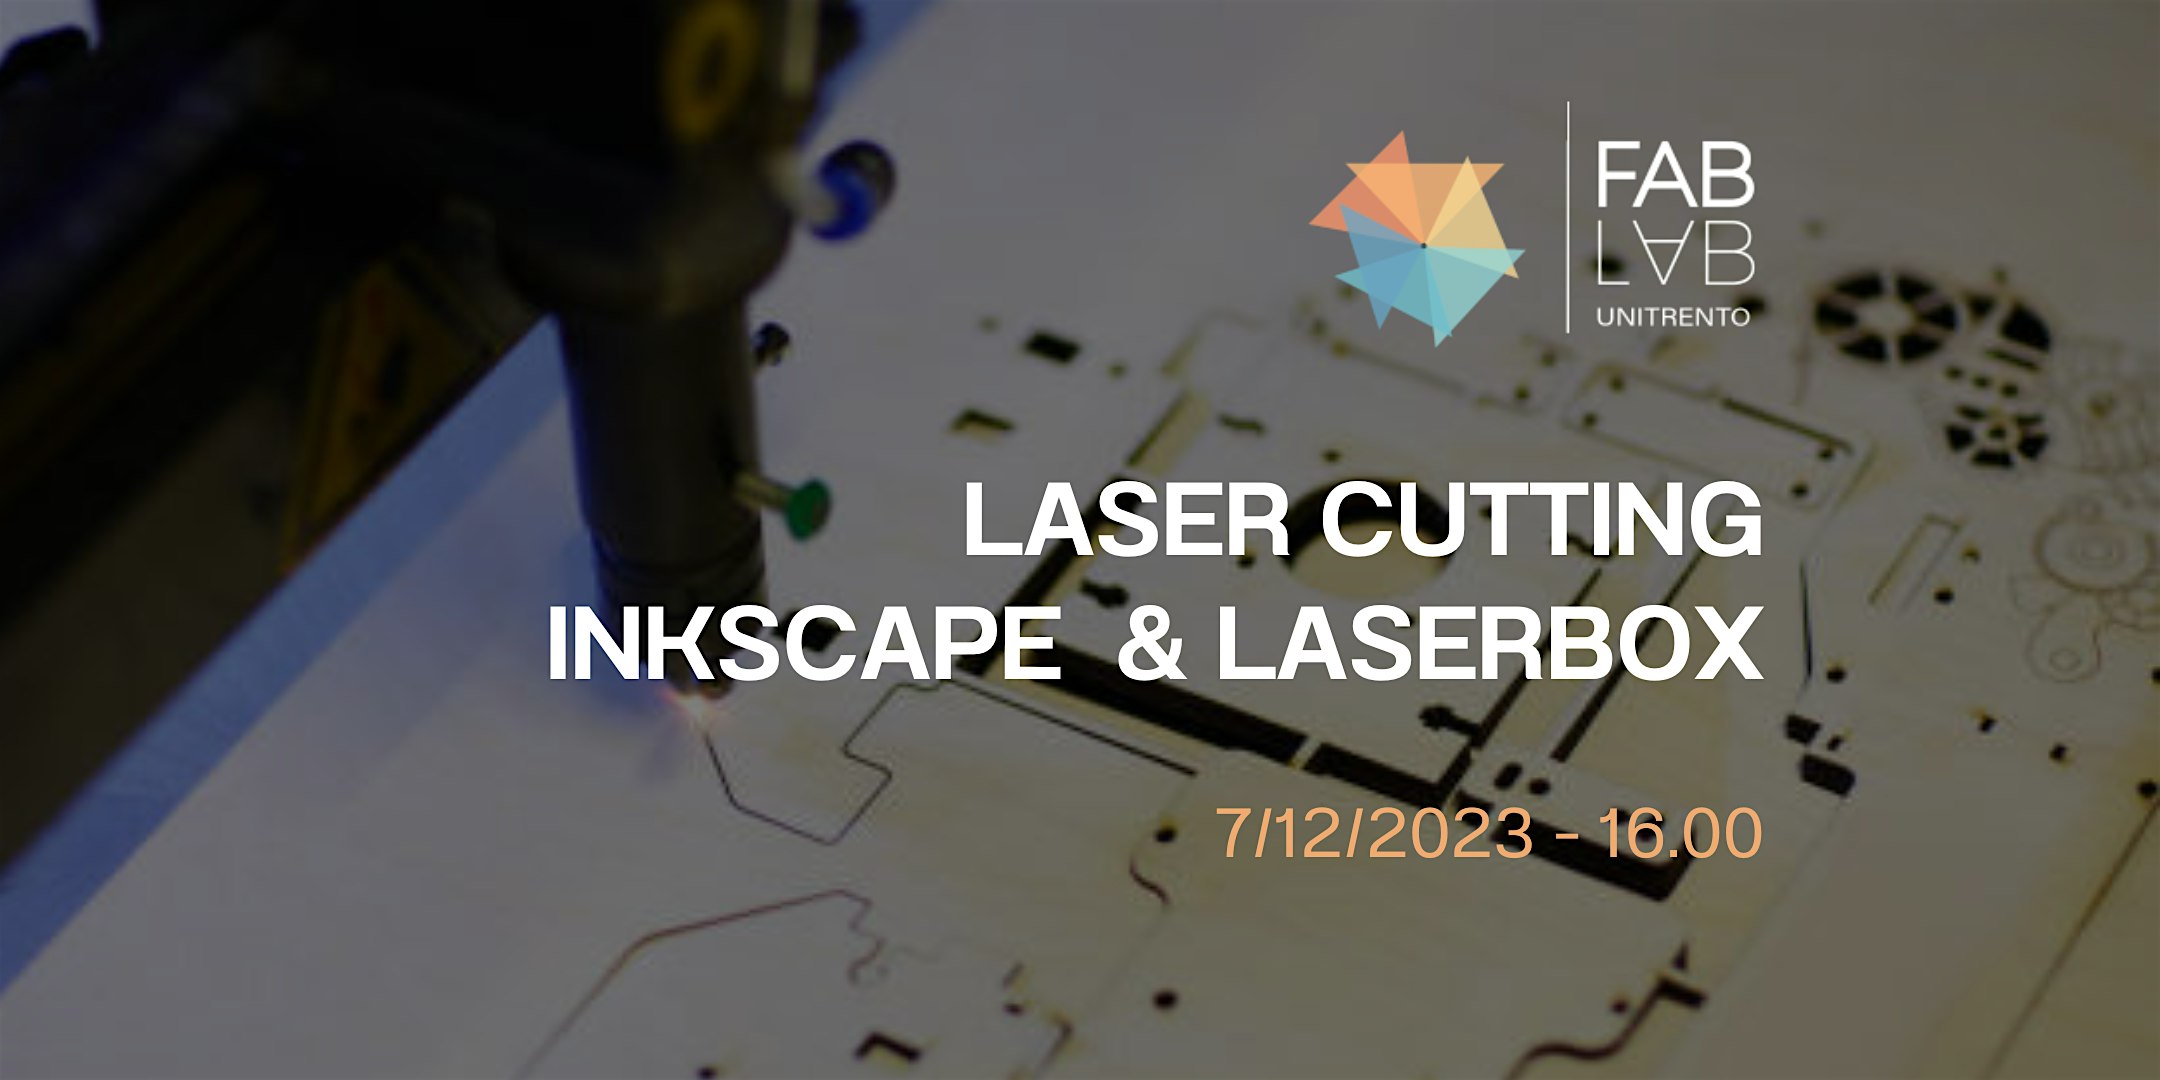 Taglio Laser: Inkscape and LaserBox